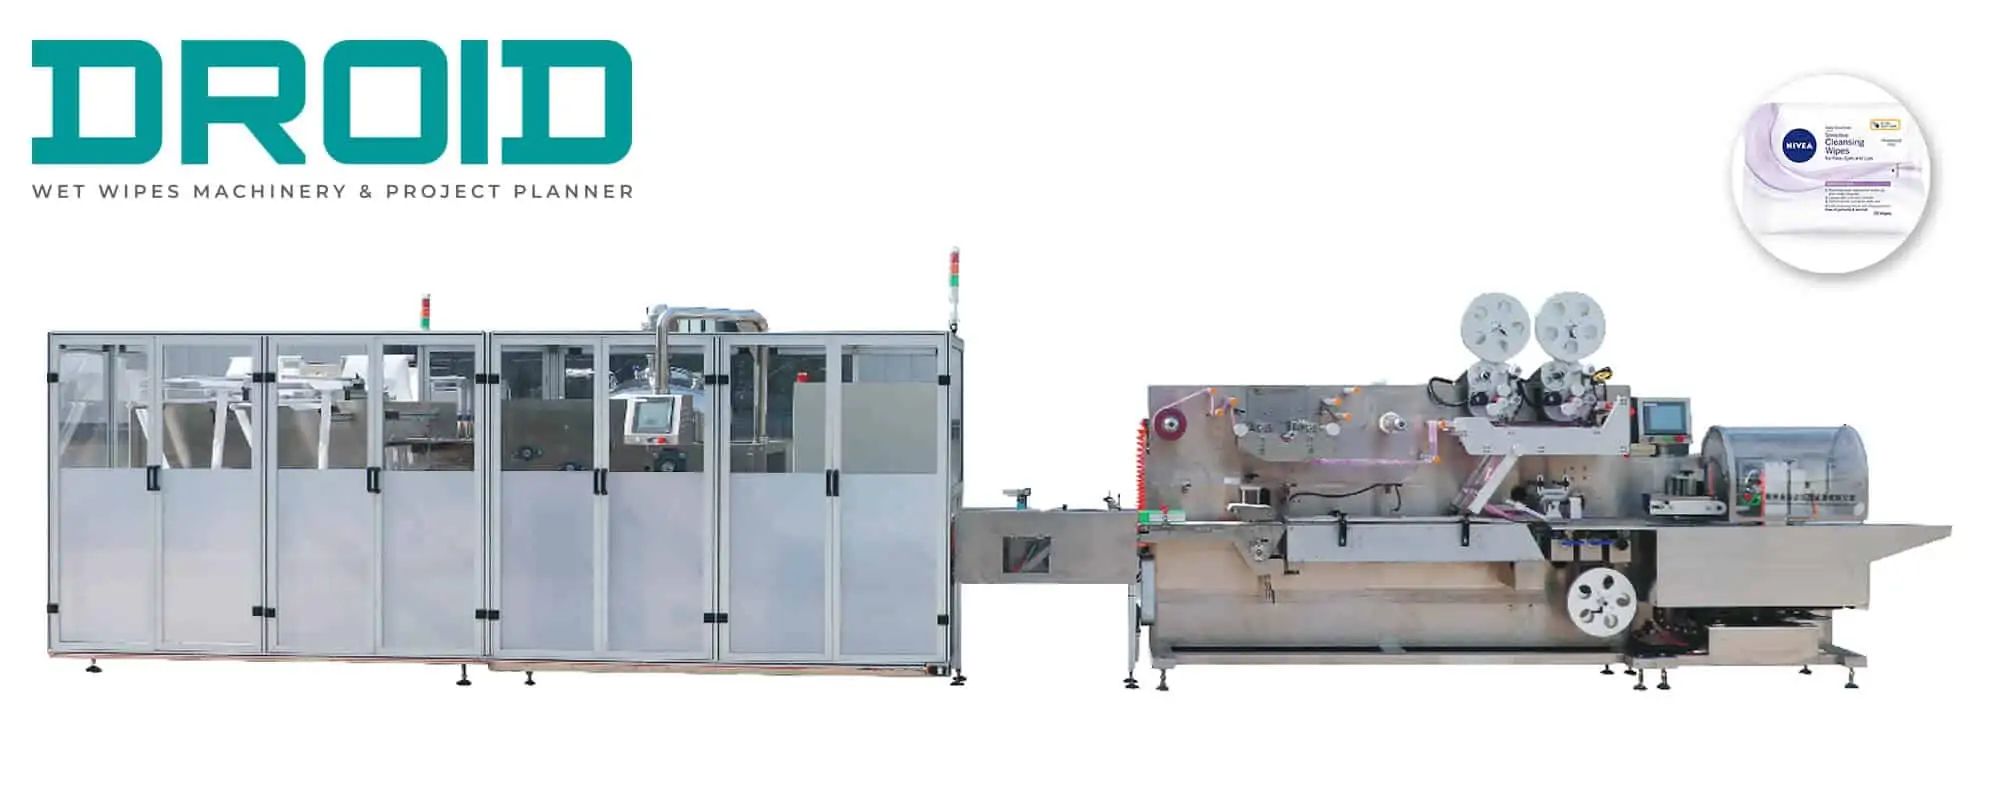 UT FL4 cross fold wet wipes converting and packaging machine - DH-L300 Spider Robot Wet Wipes Lid applicator